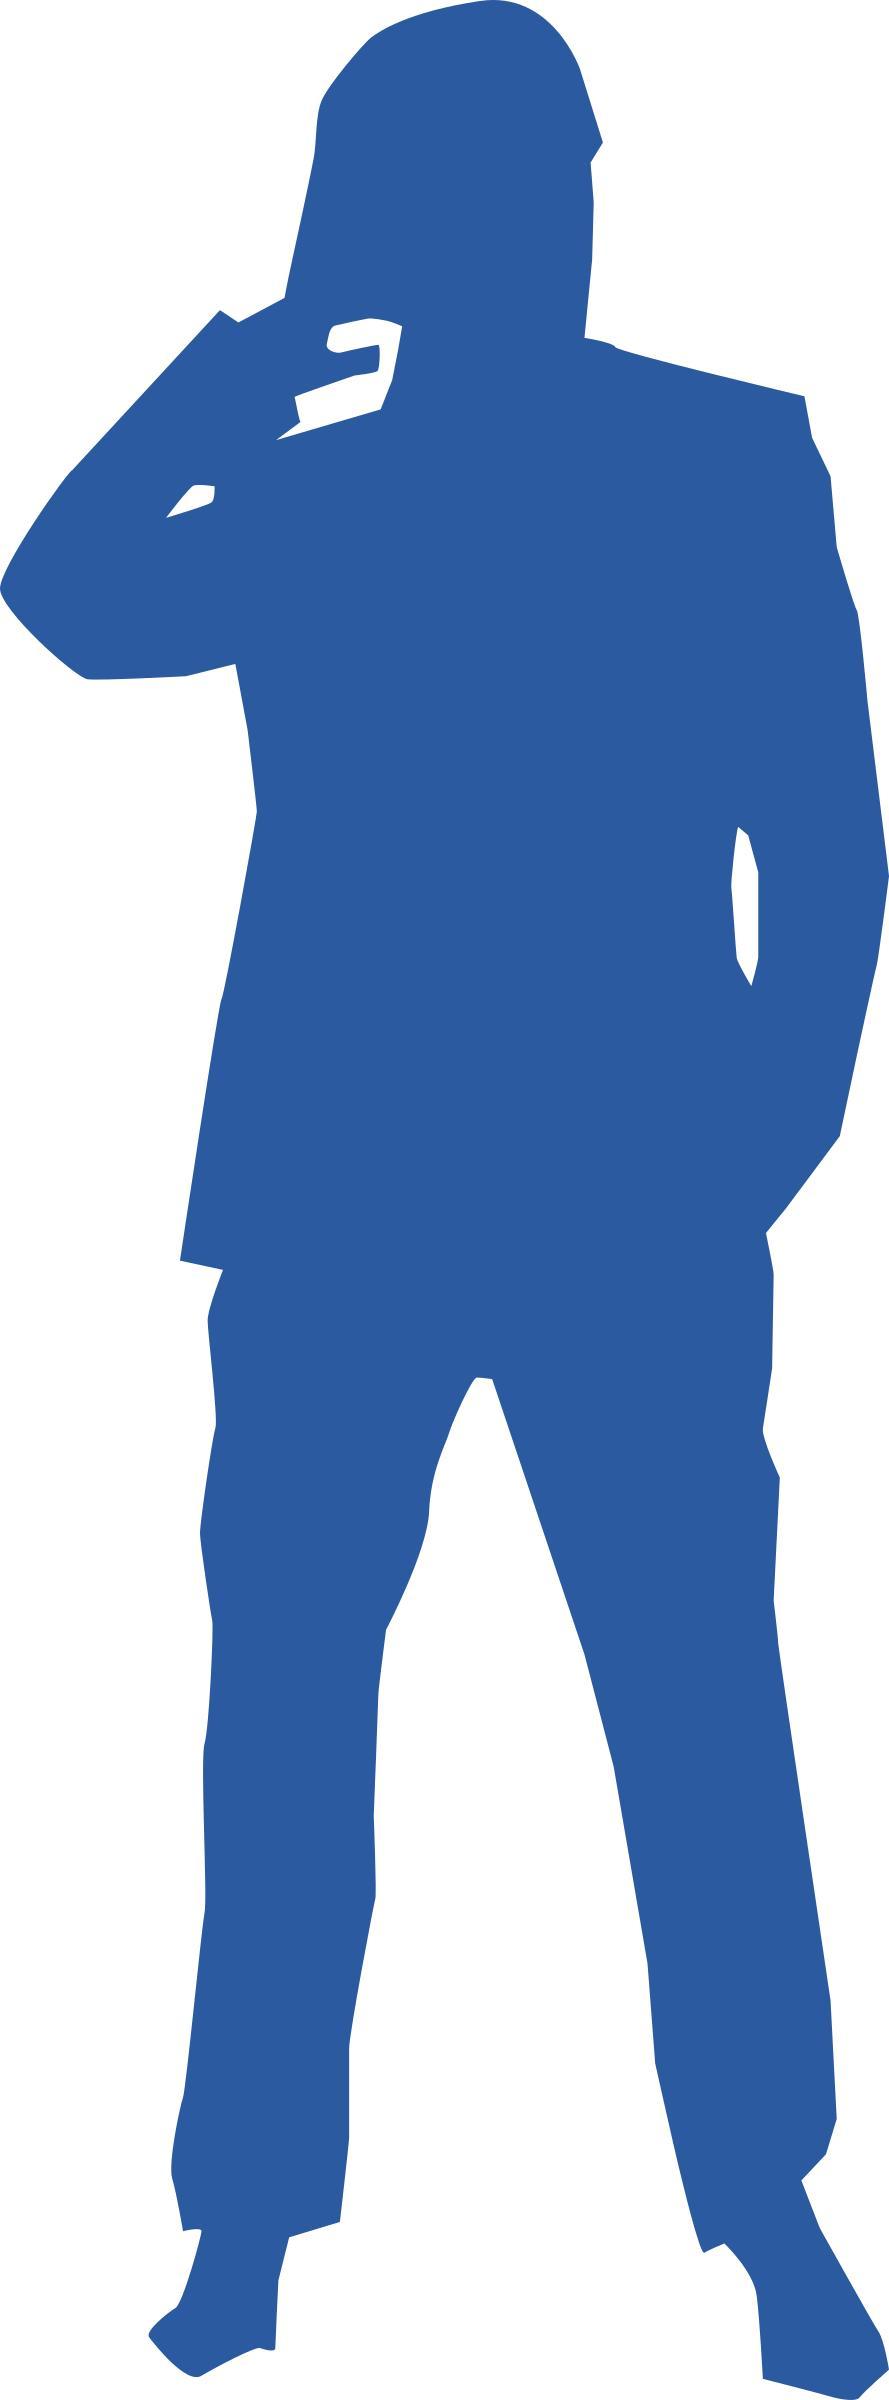 Thinking man silhouette png transparent